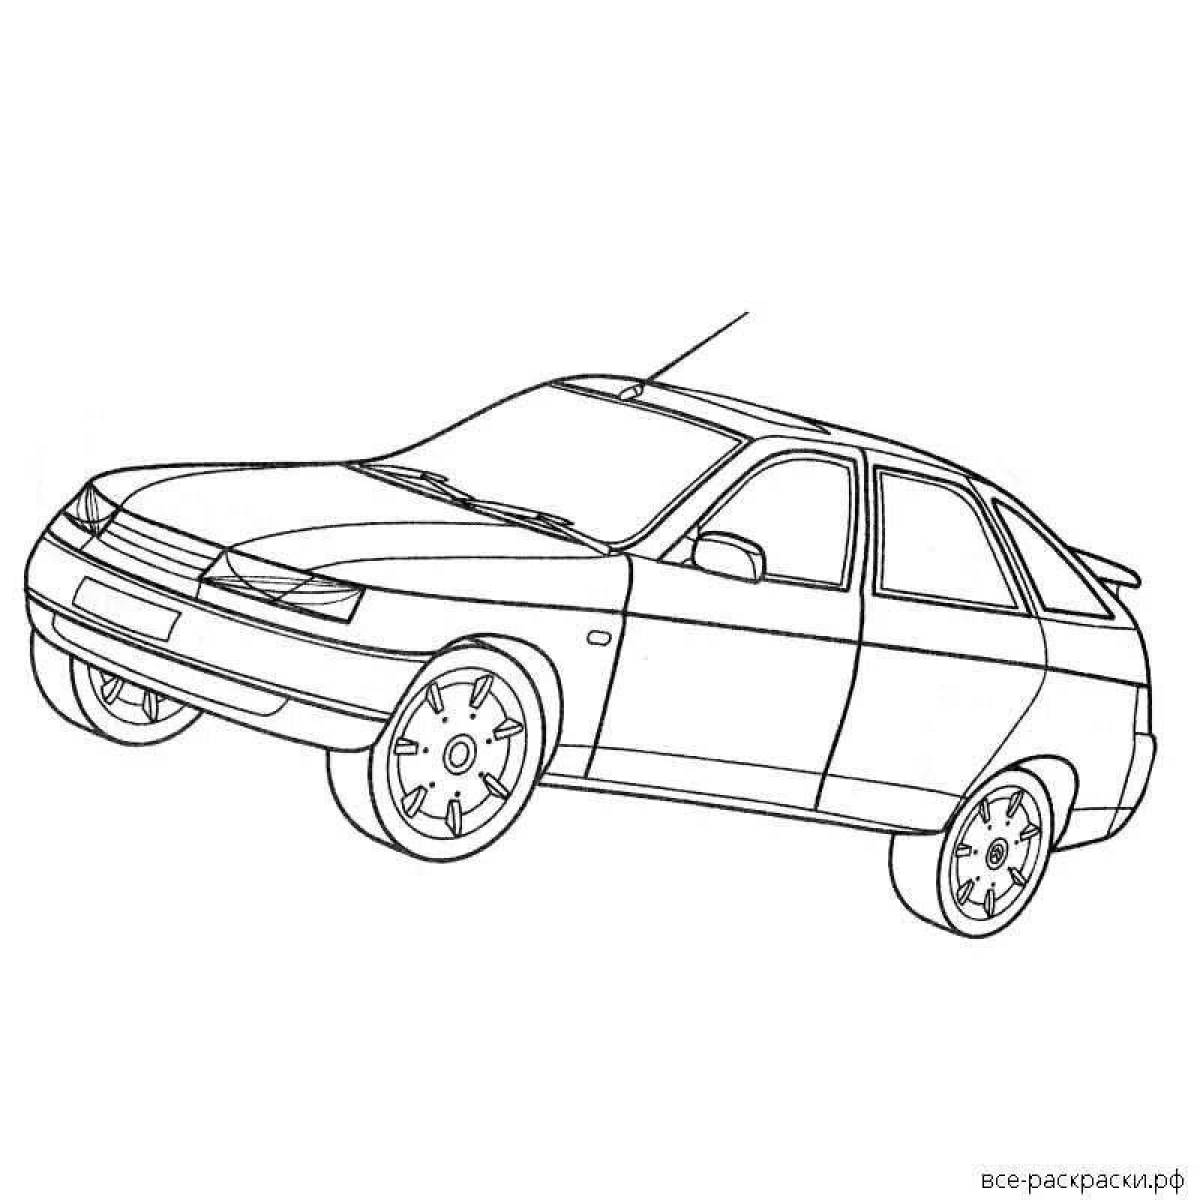 Playful vaz 2112 coloring picture